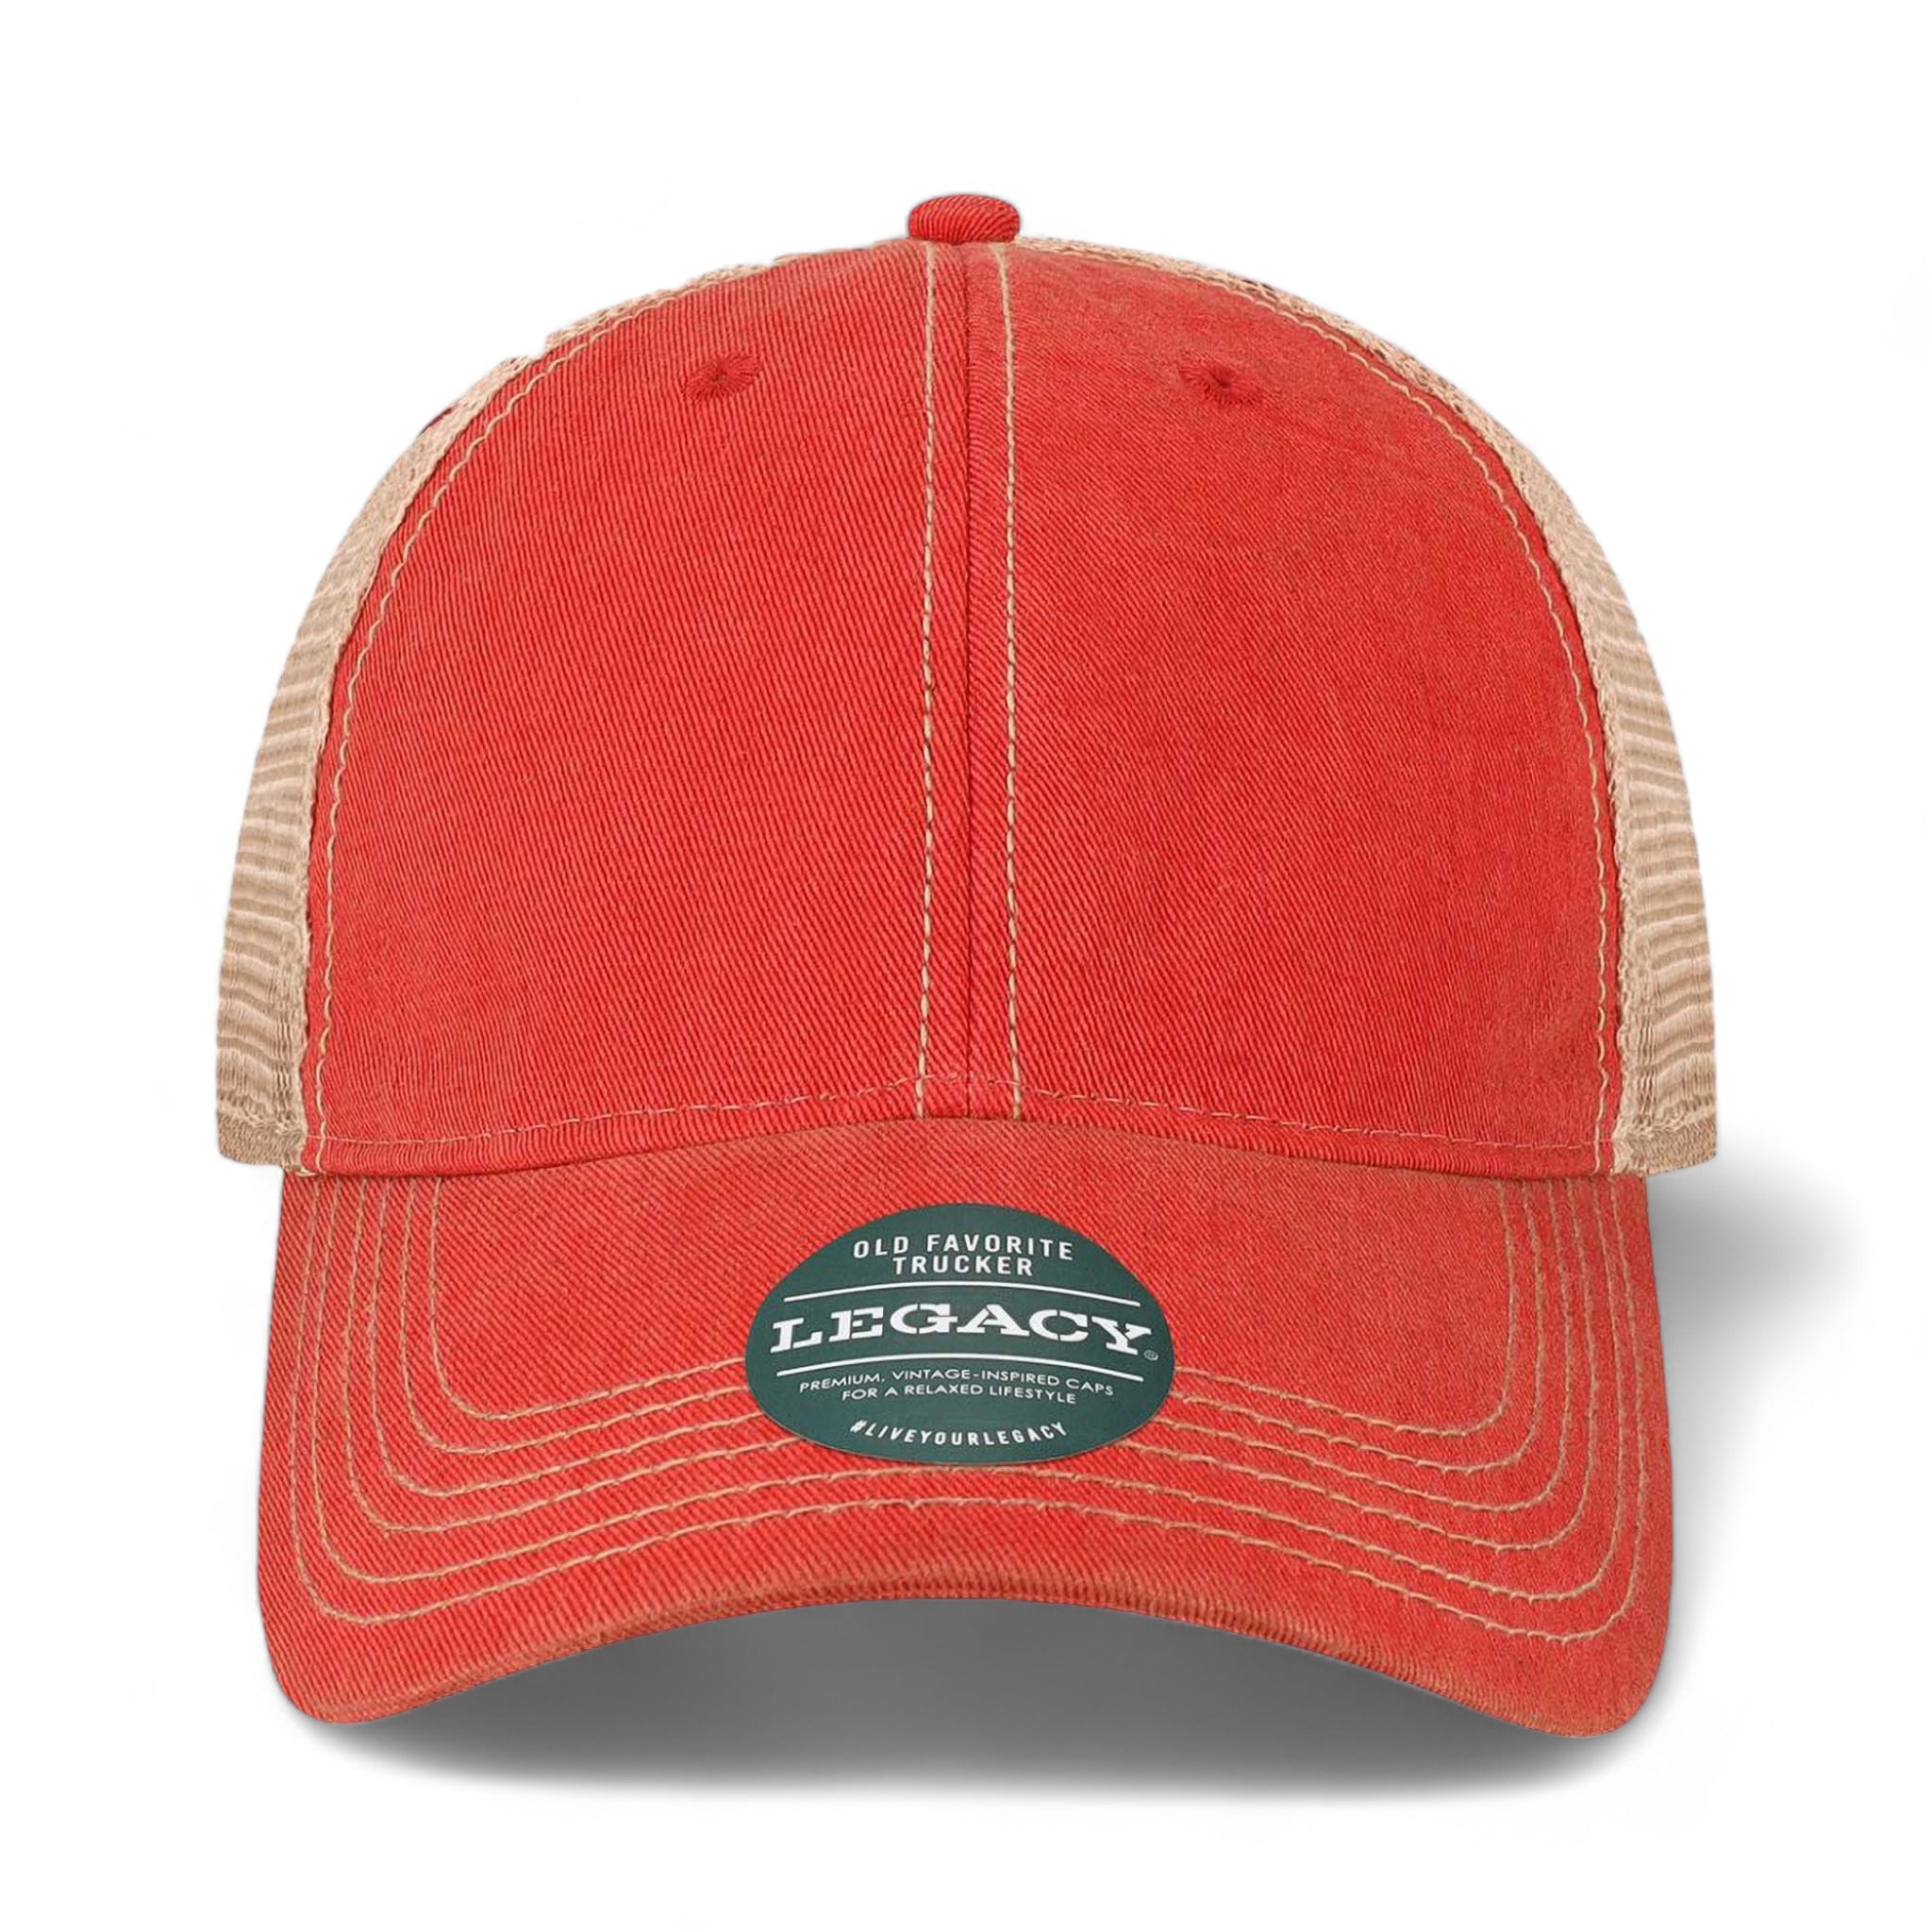 Front view of LEGACY OFAY custom hat in scarlet red and khaki